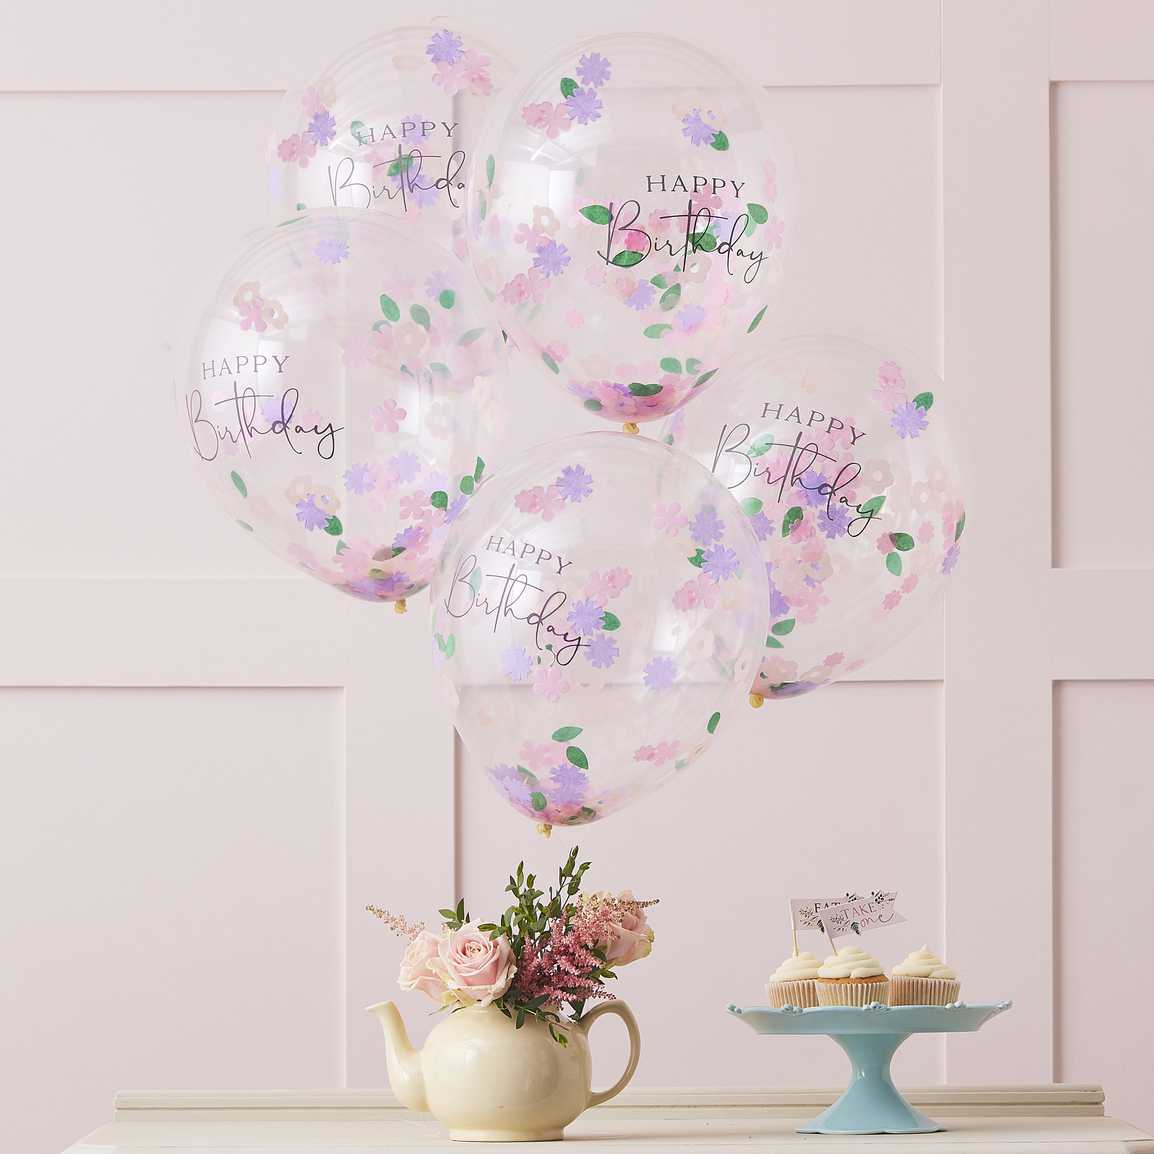 Latex birthday balloons bouquet with flower confetti 5 pcs